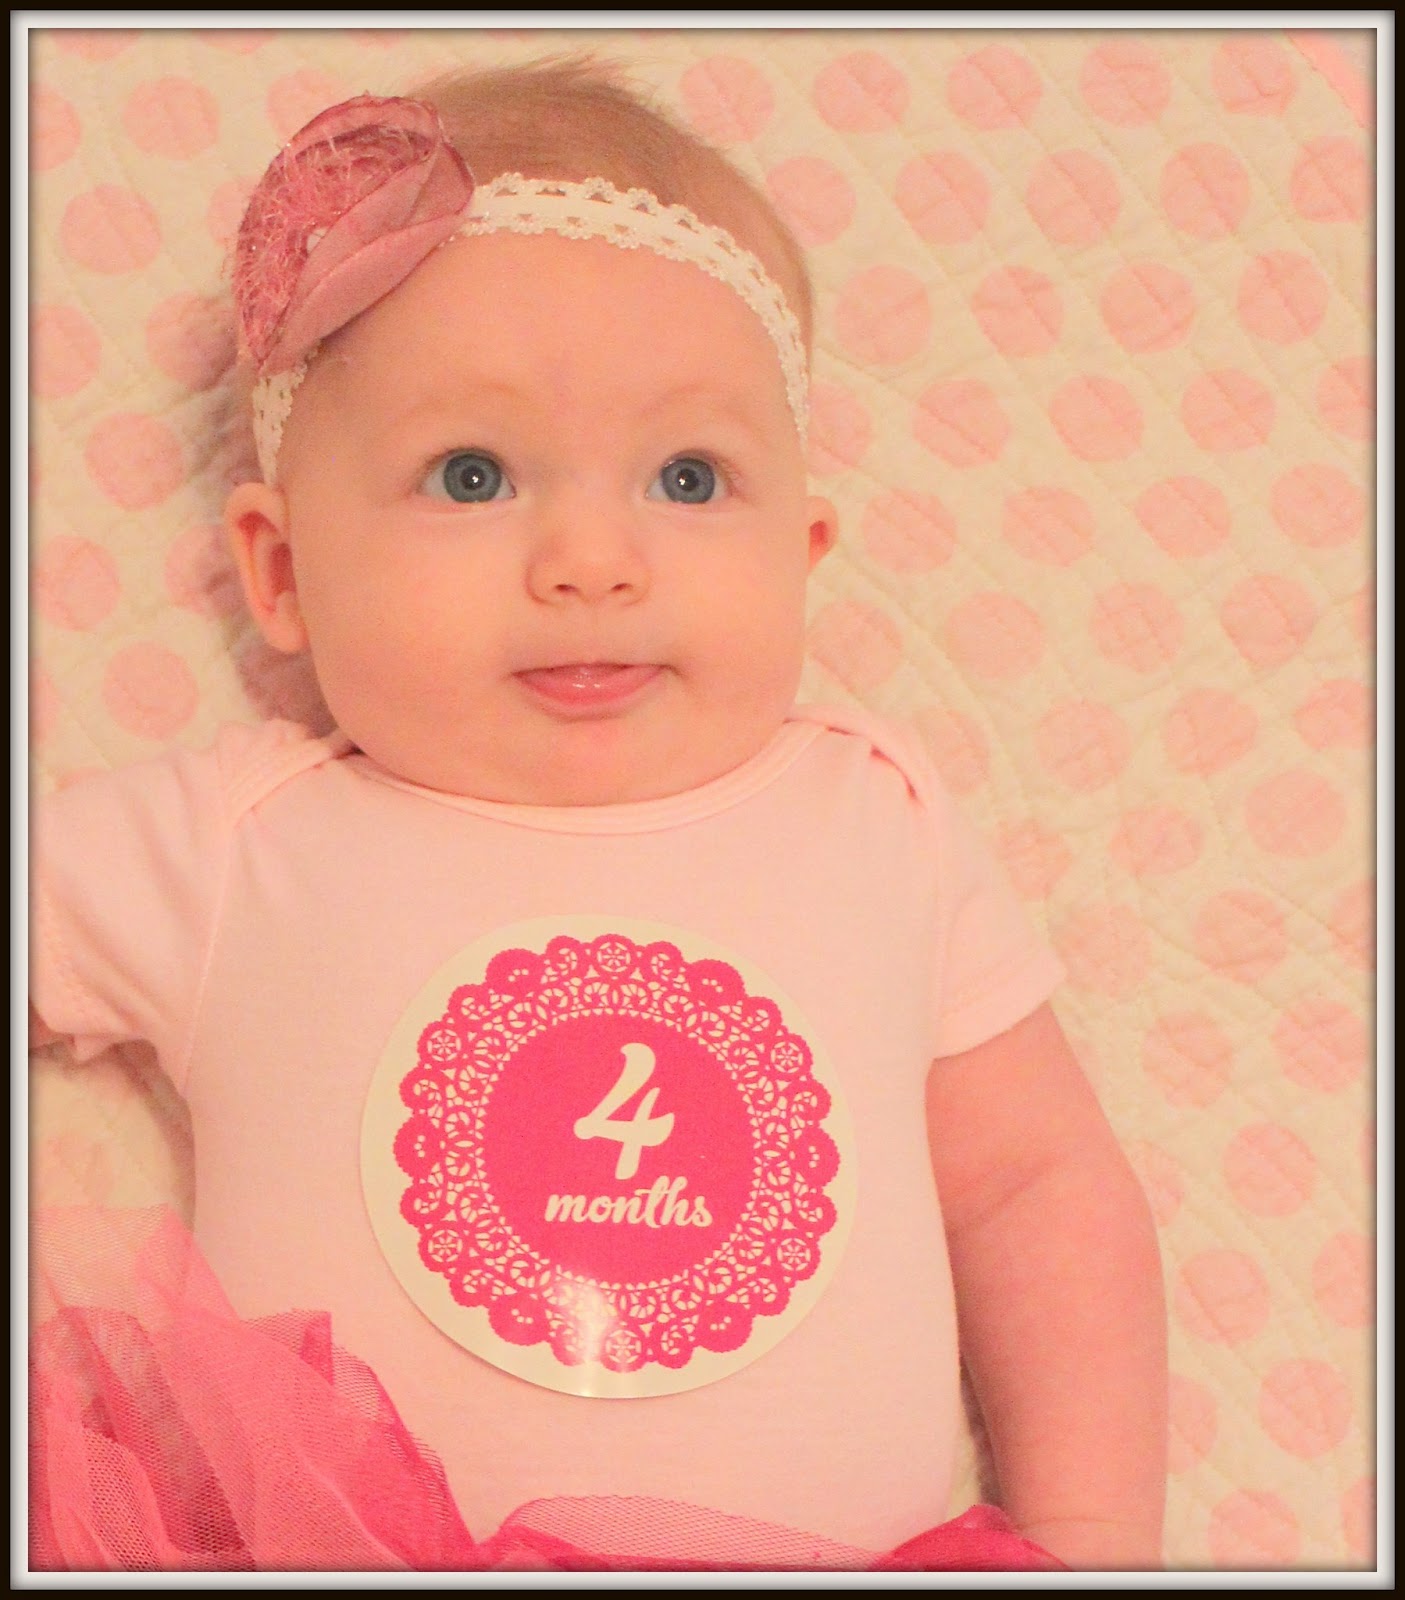 live.laugh.love.baby.: 4 months